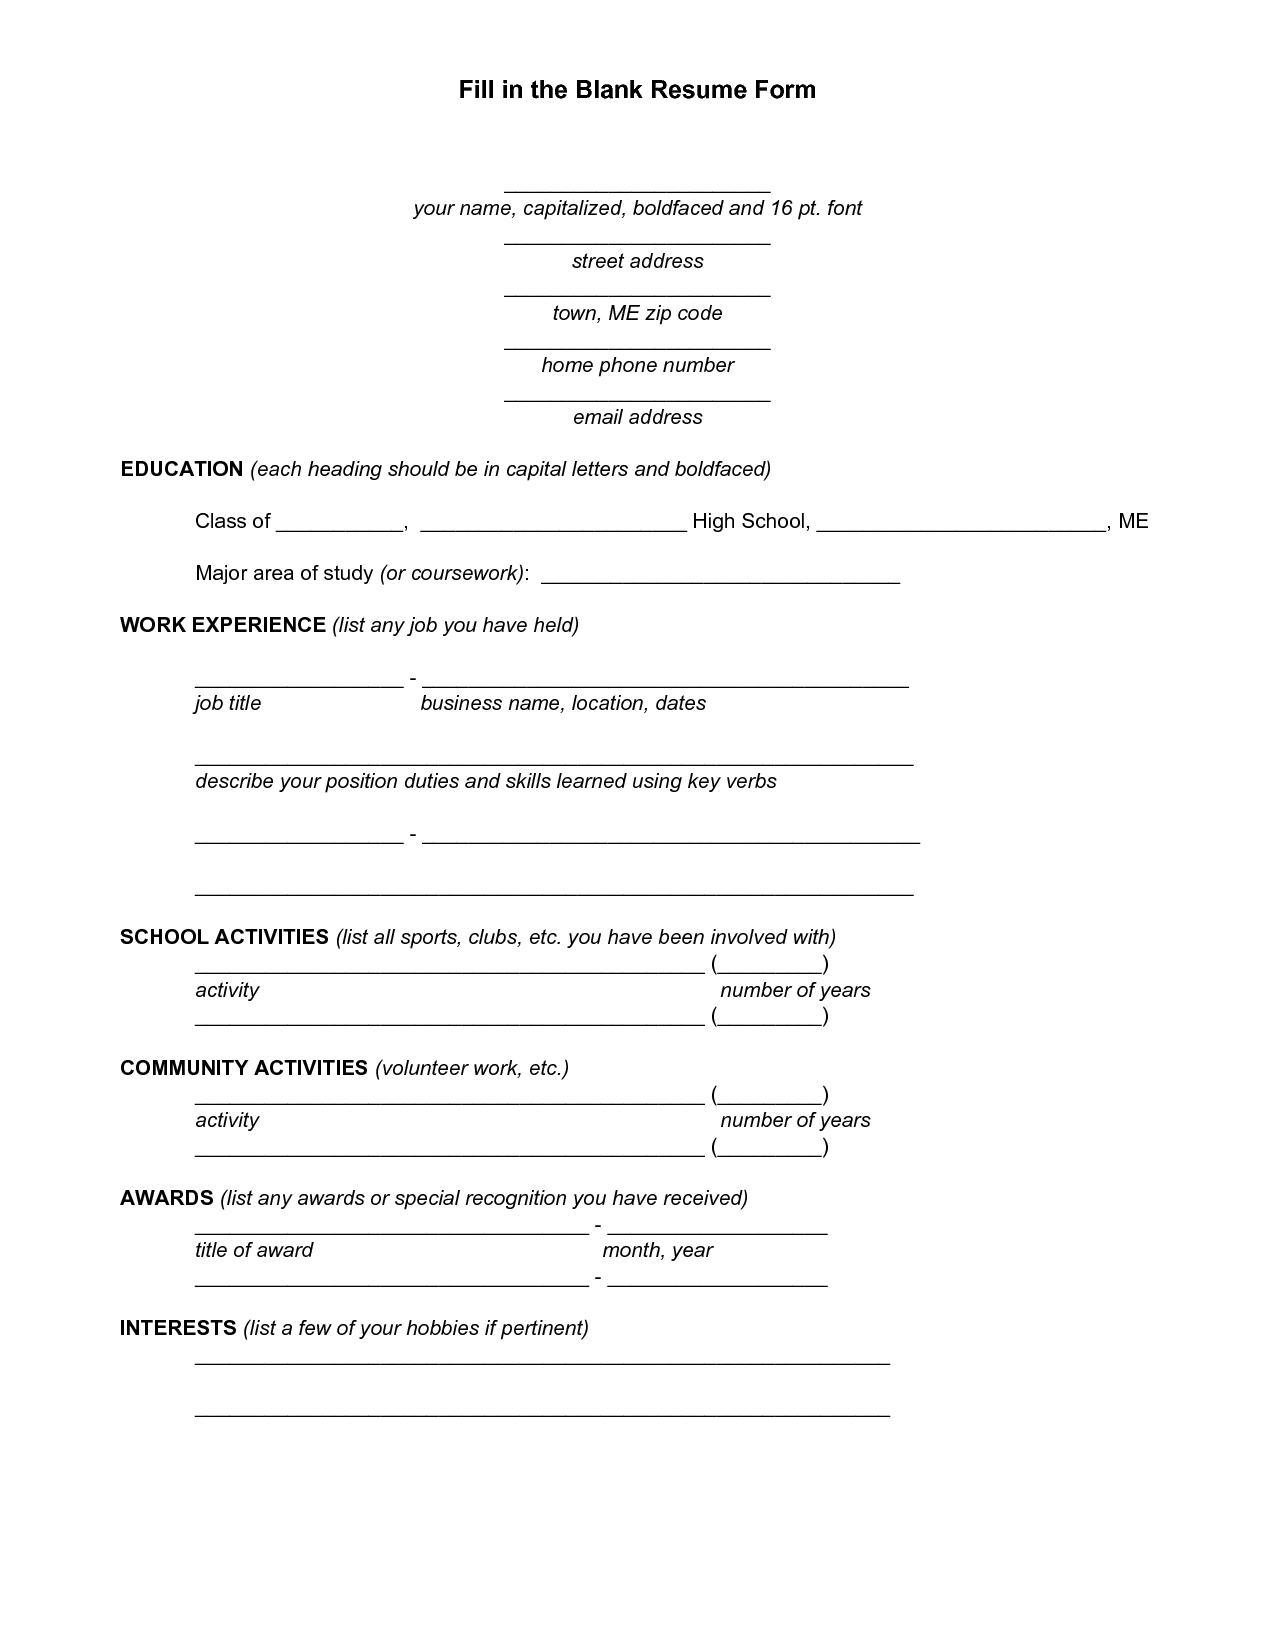 Free Printable Fill In The Blank Resume Templates Unique Template - Free Printable Fill In The Blank Resume Templates